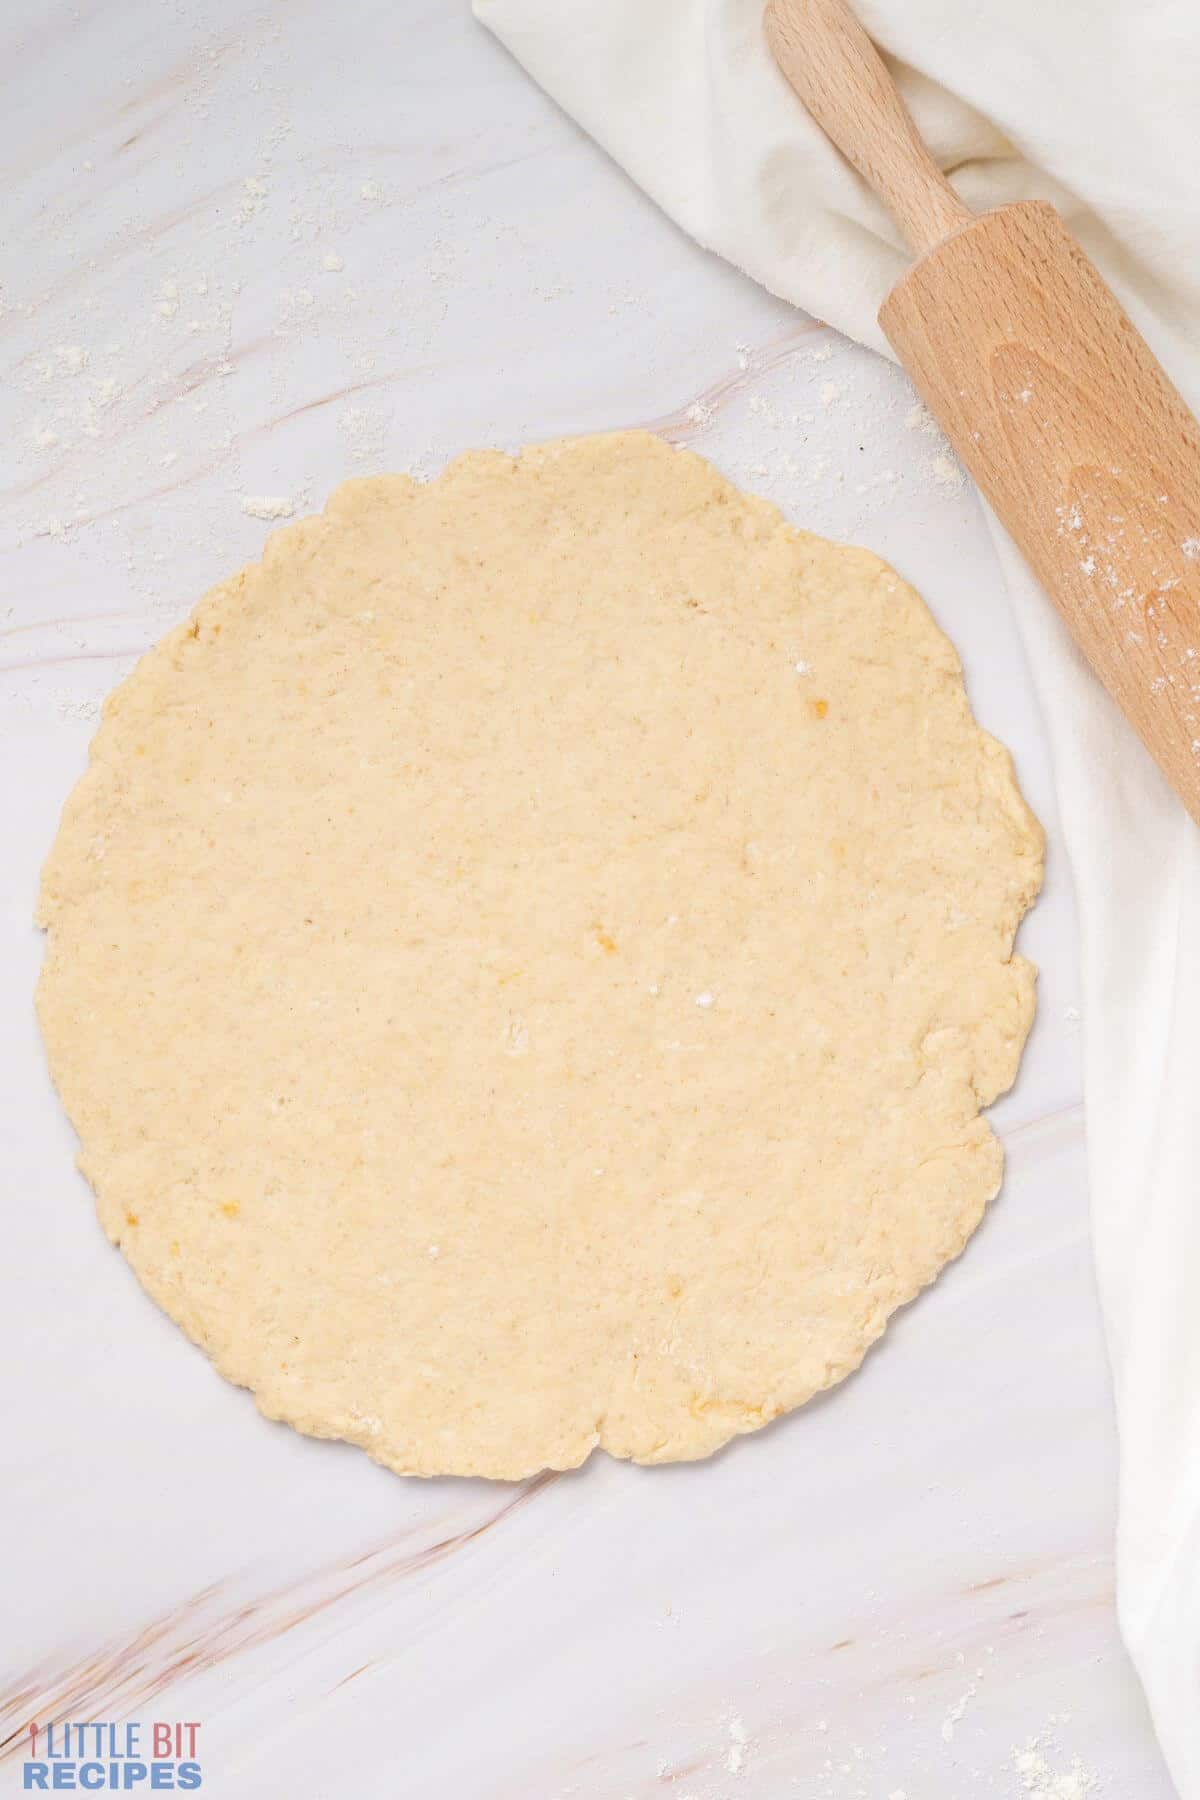 rolled out crust dough.